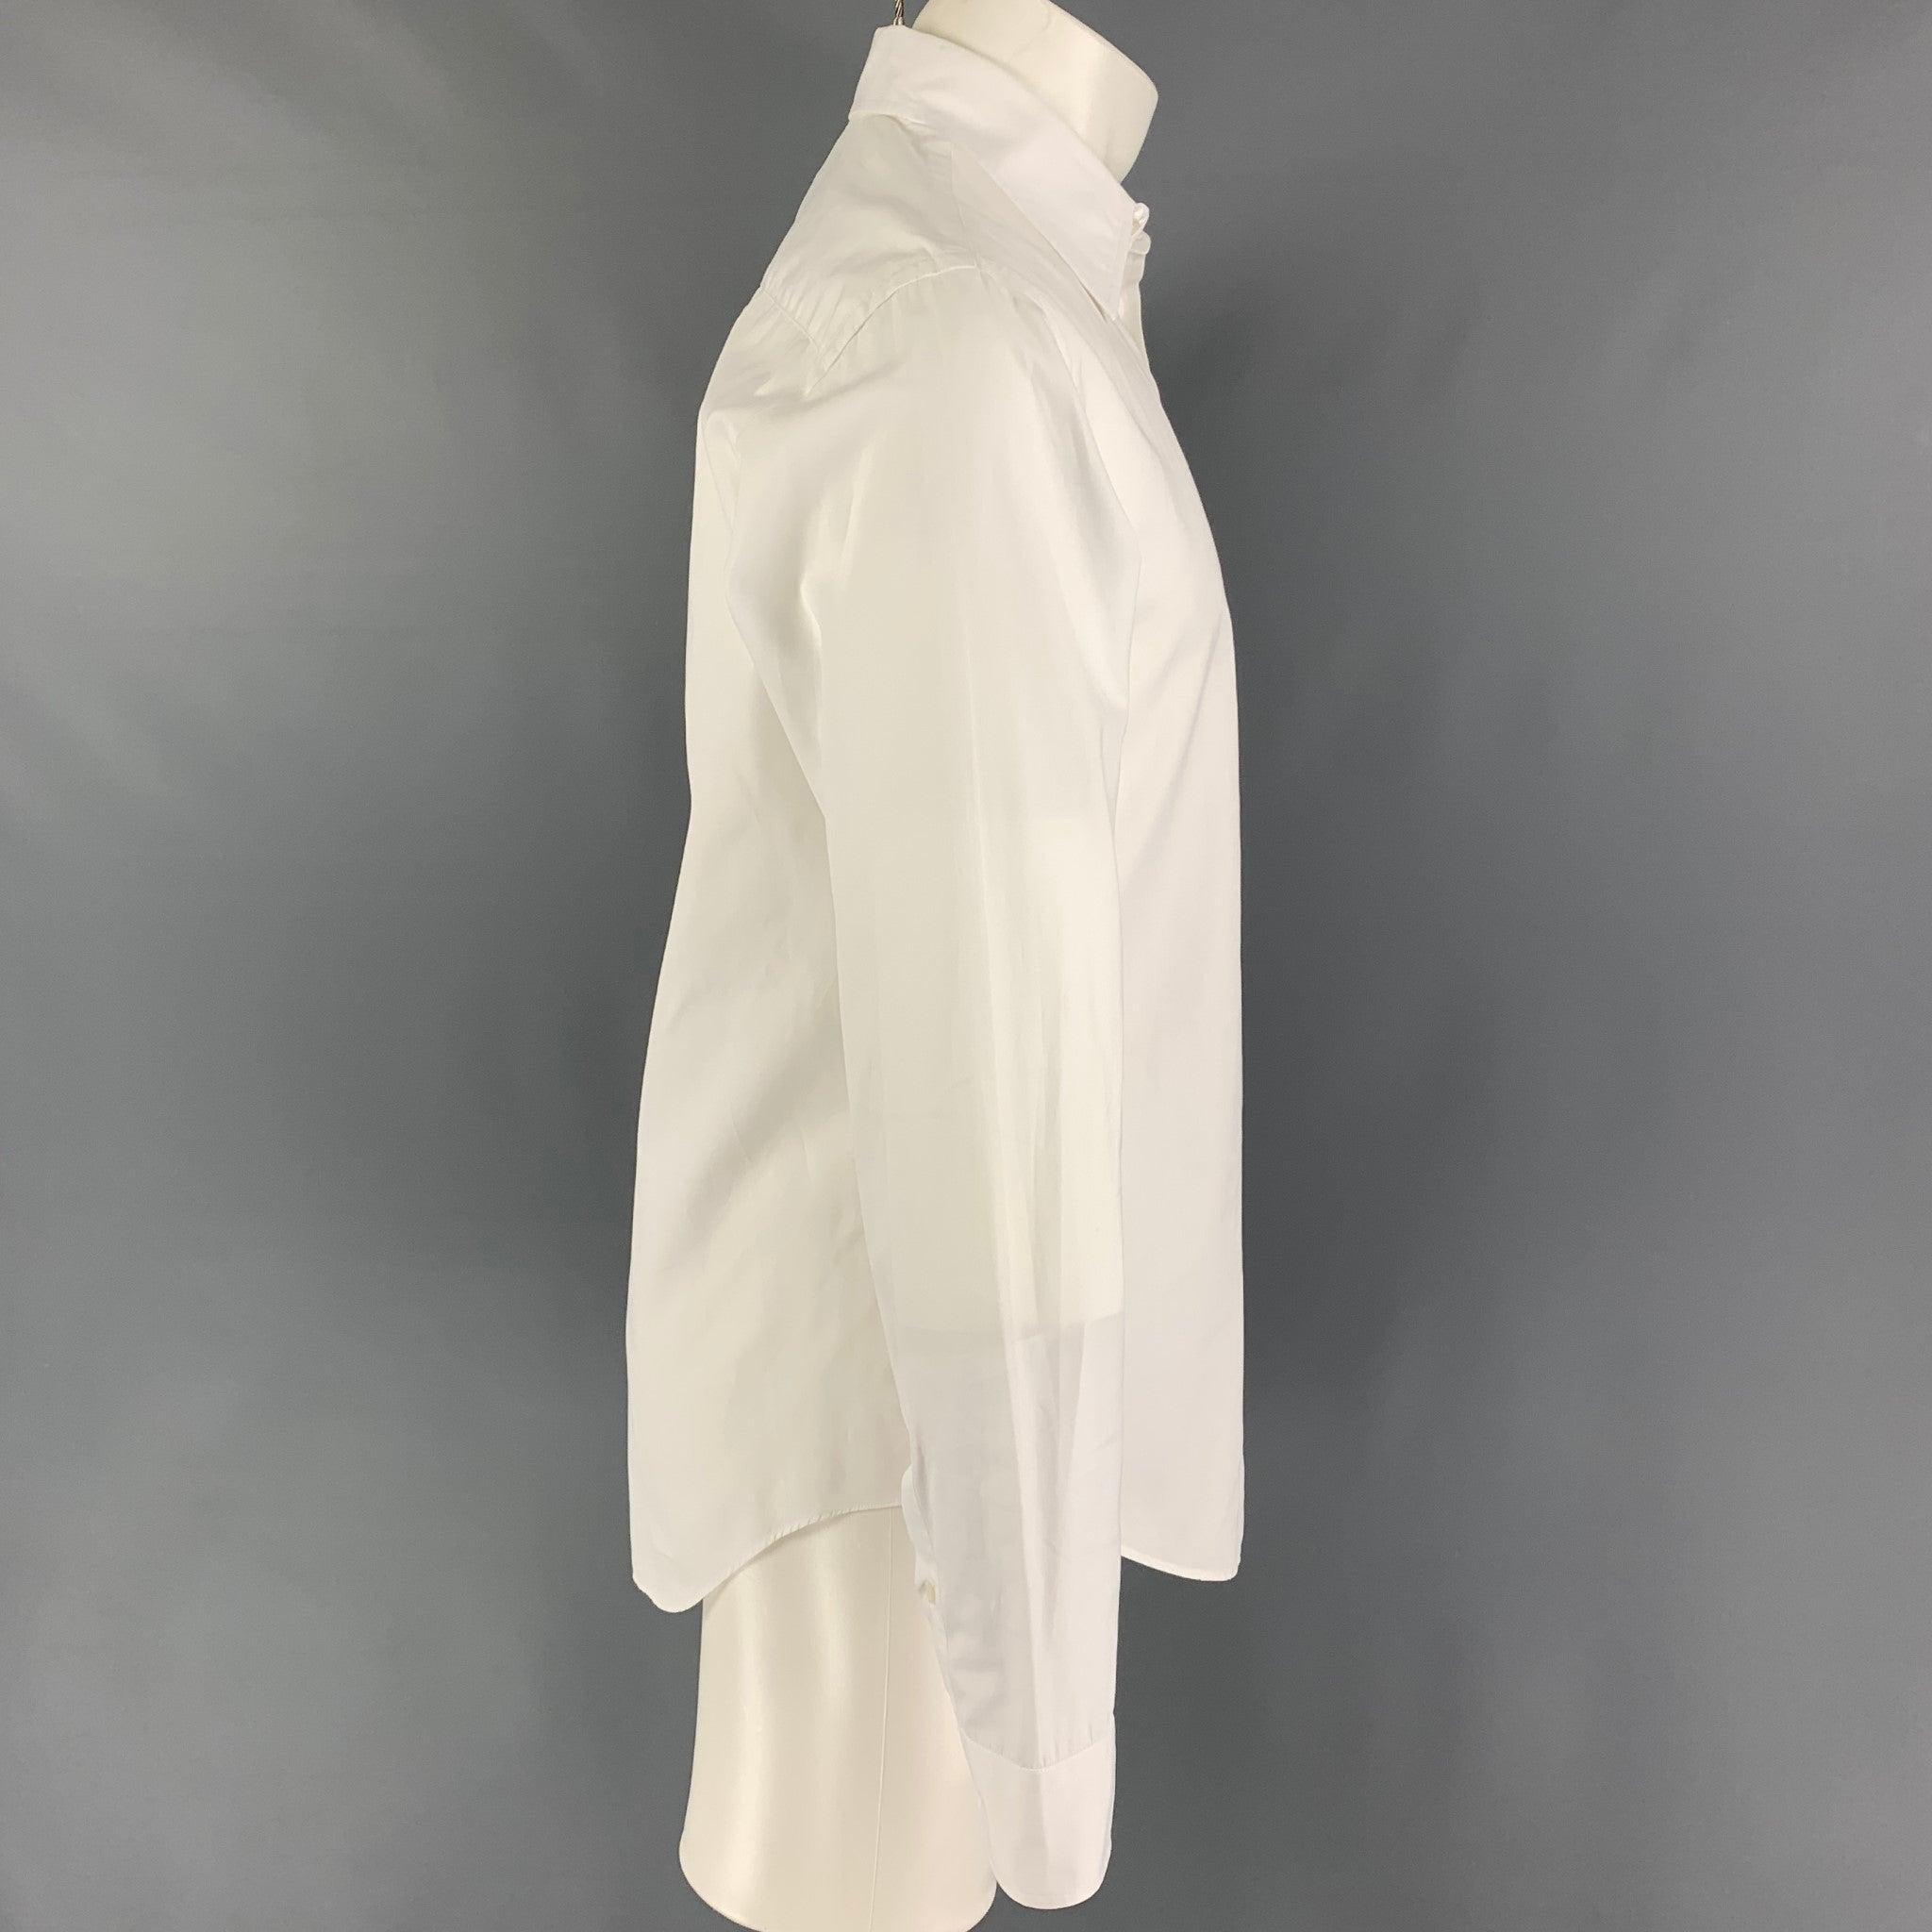 GIORGIO ARMANI long sleeve shirt comes in a white cotton featuring a classic style, spread collar, and a button up closure. Made in Italy.
 Excellent
 Pre-Owned Condition. 
 

 Marked:  39/15.5 
 

 Measurements: 
  
 Shoulder: 18 inches Chest: 40